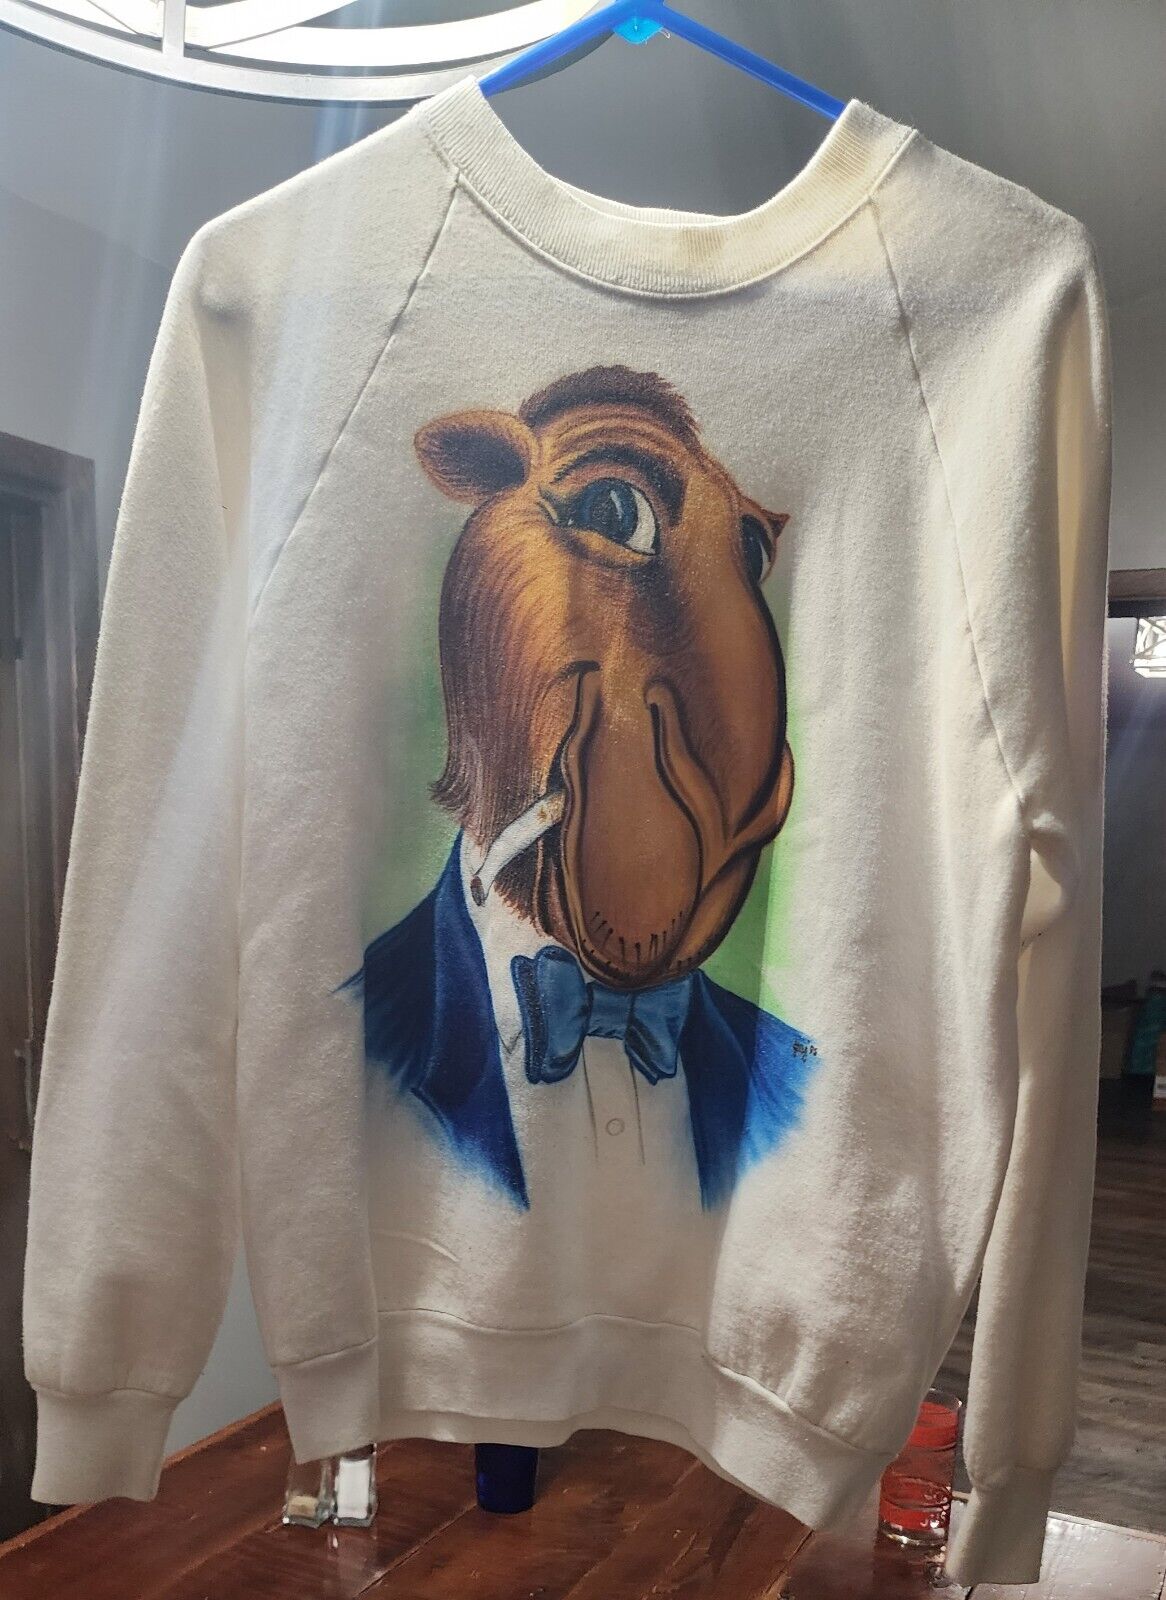 Vintage JOE CAMEL Airbrush Paint Sweatshirt 1996 By JERRY SMOOTH CHARACTER LARGE